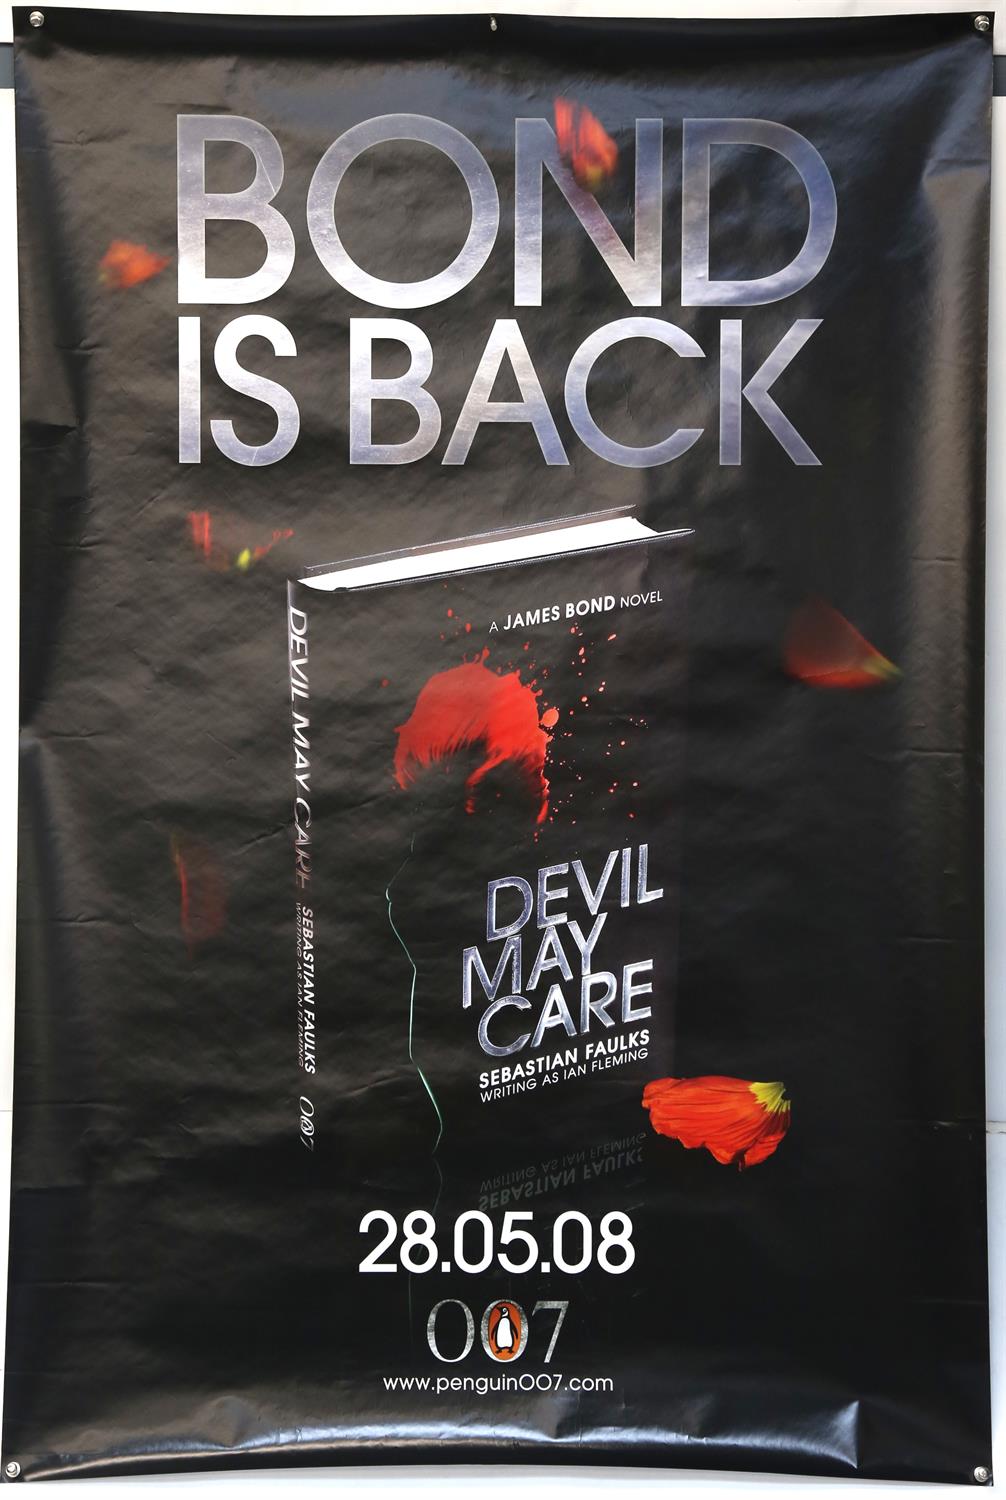 James Bond - Four Bus Stop 40 x 60 inch posters, two for the book launch of Devil May Care,